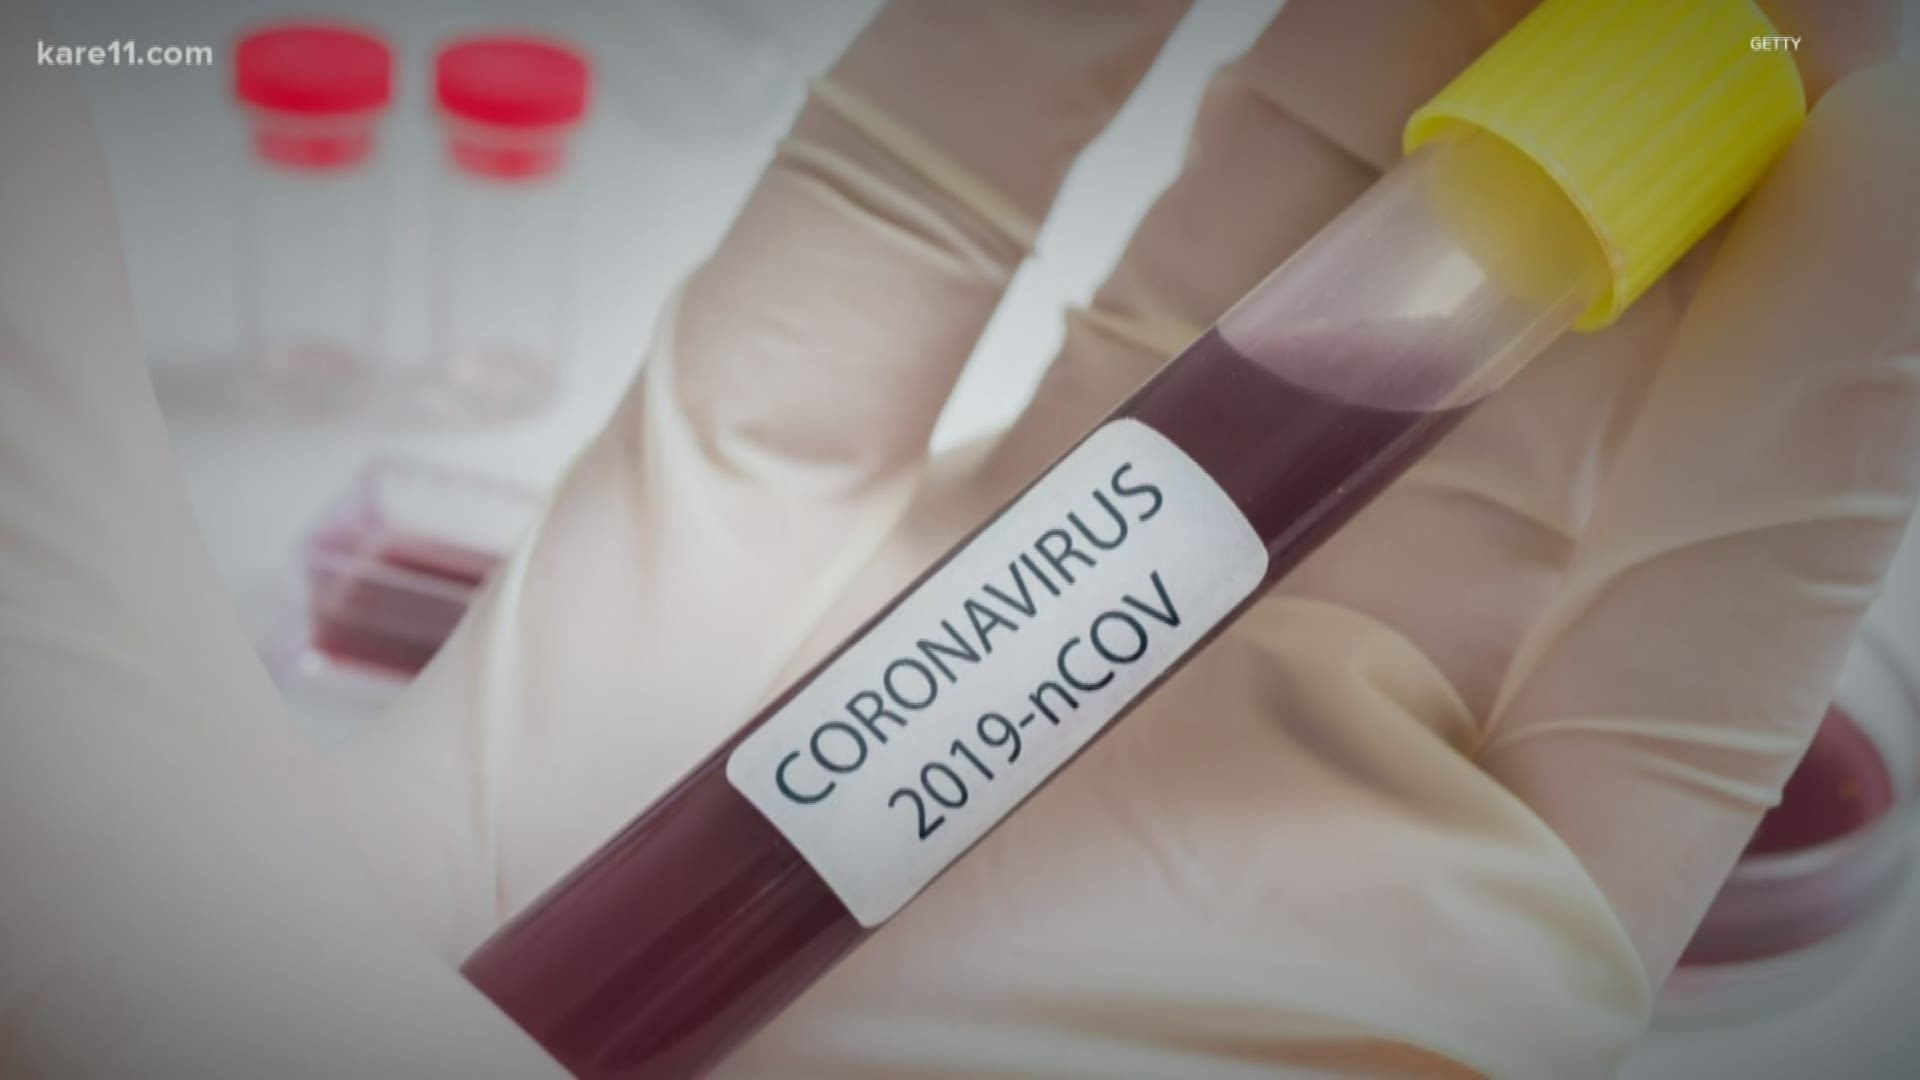 The Minnesota Department of Health confirmed Sunday a second presumptive positive case of novel coronavirus in the state.